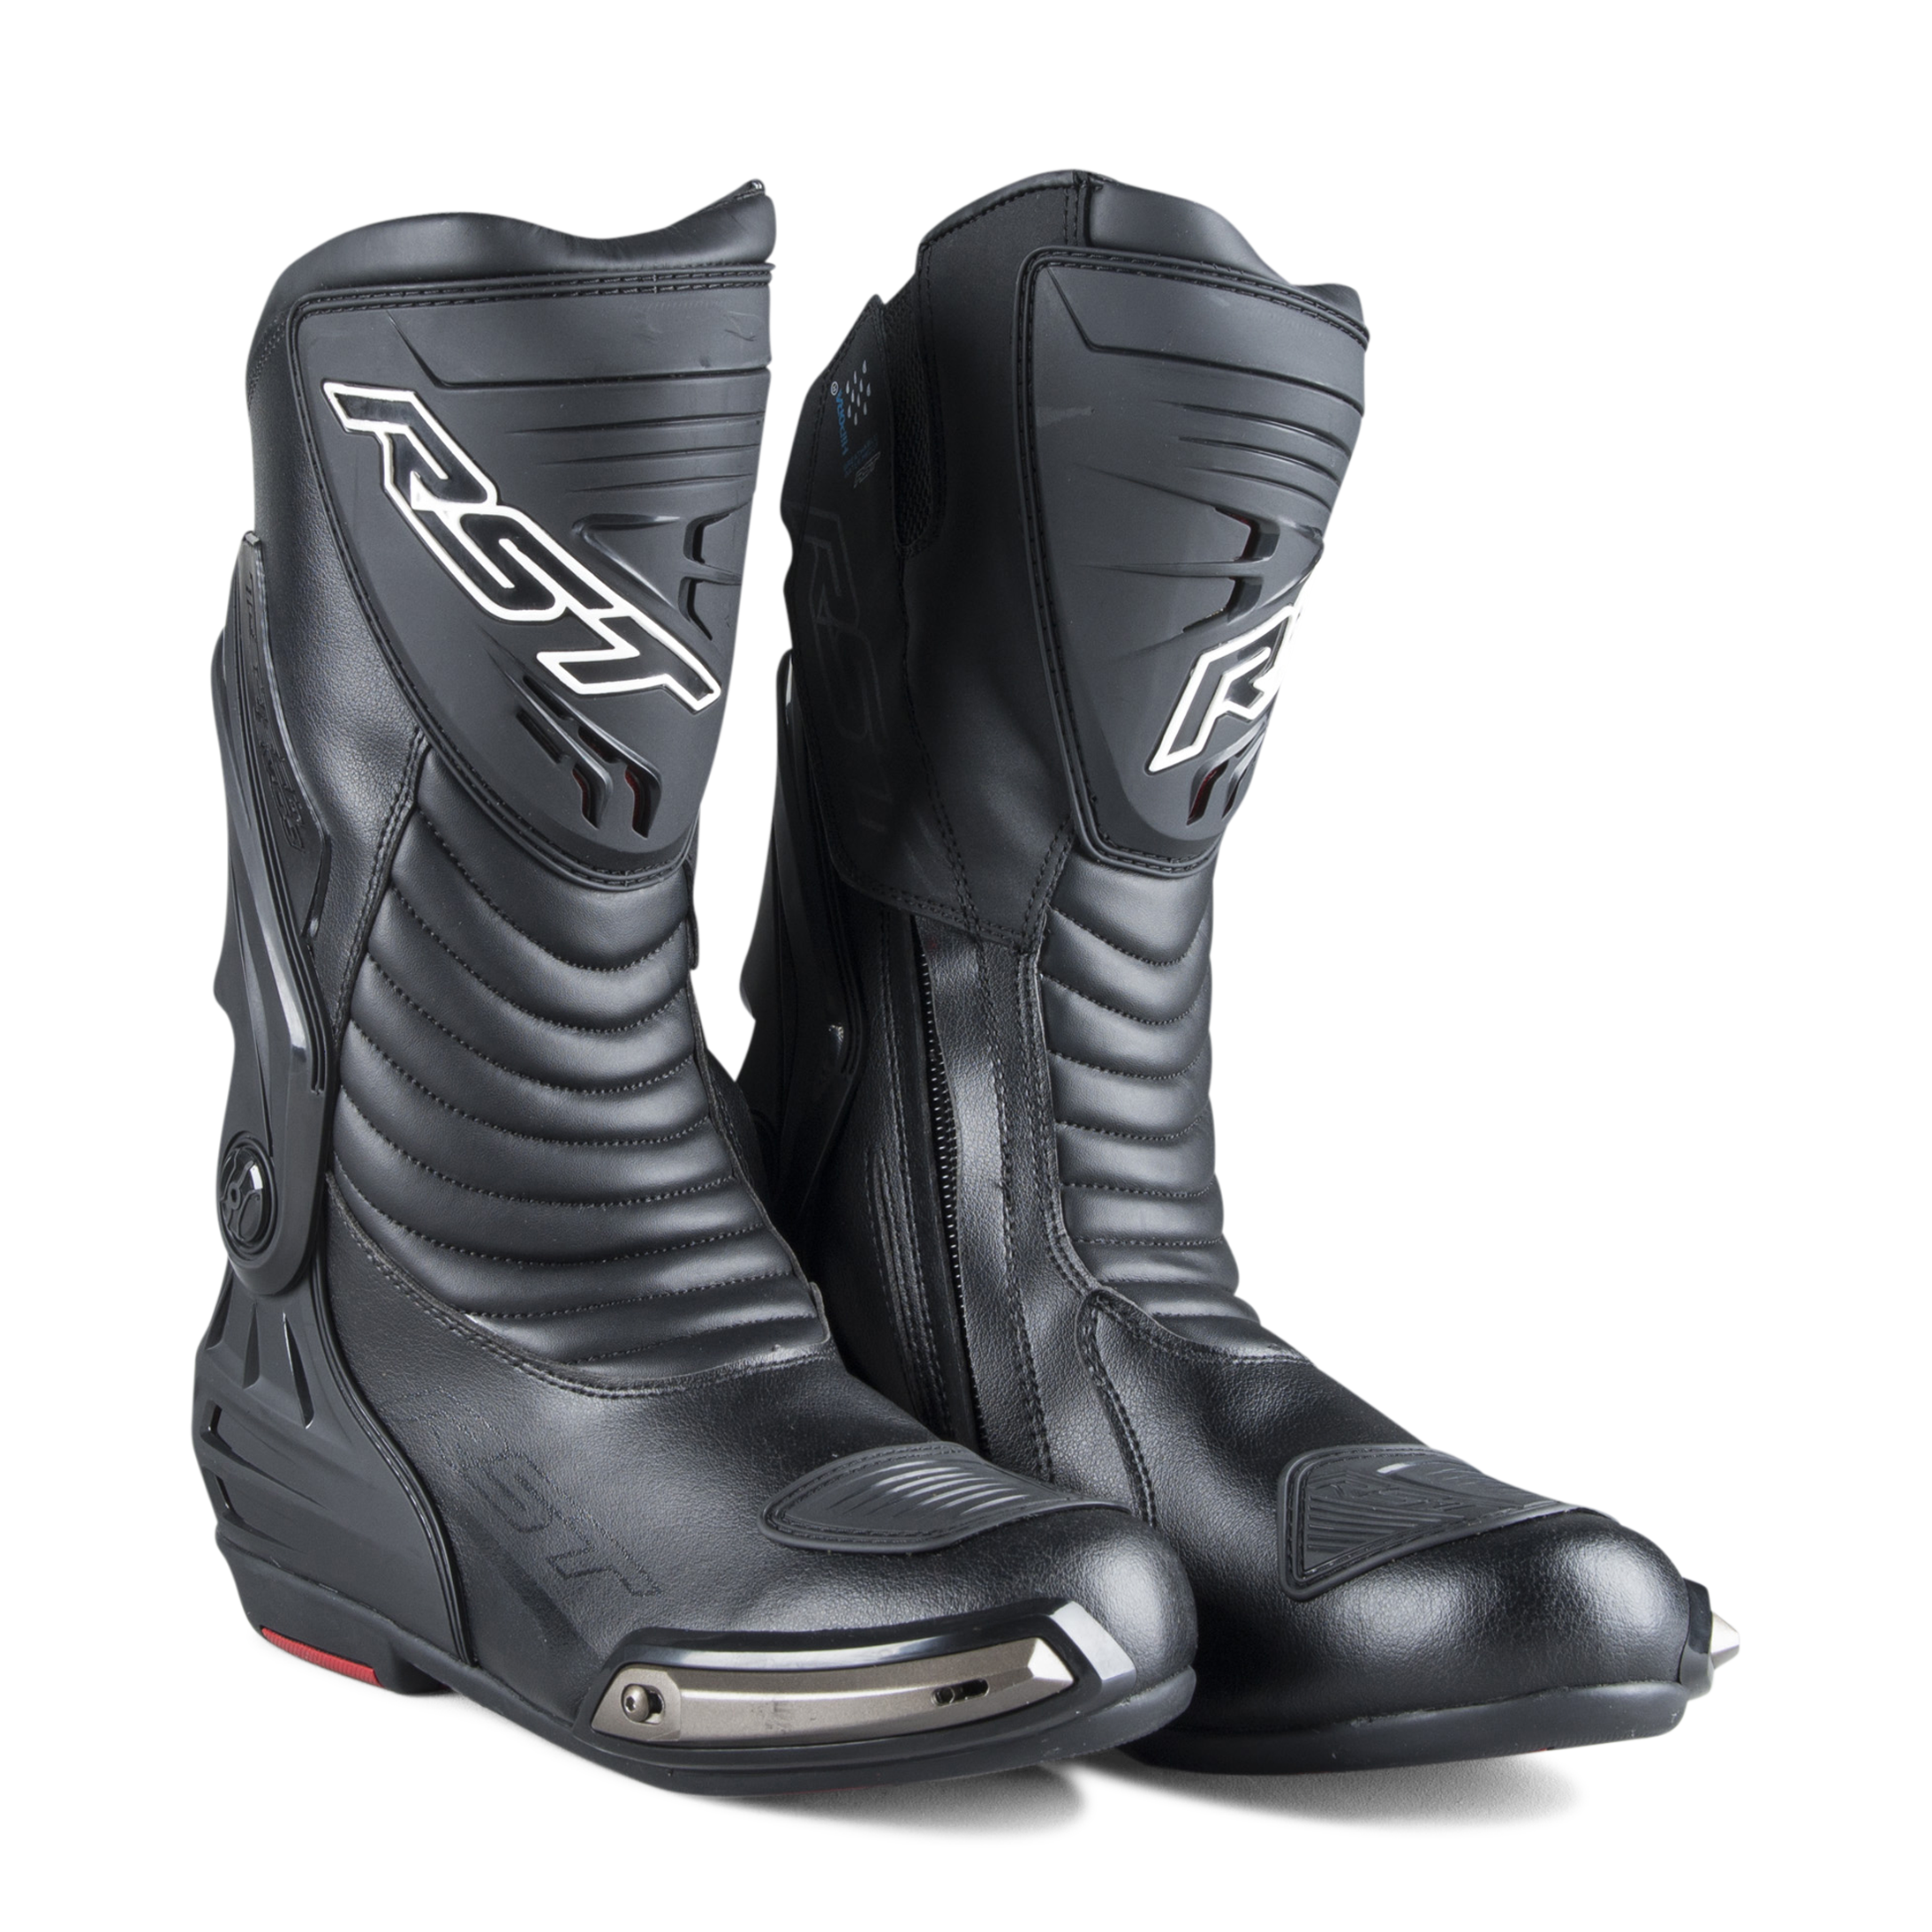 rst tractech boots